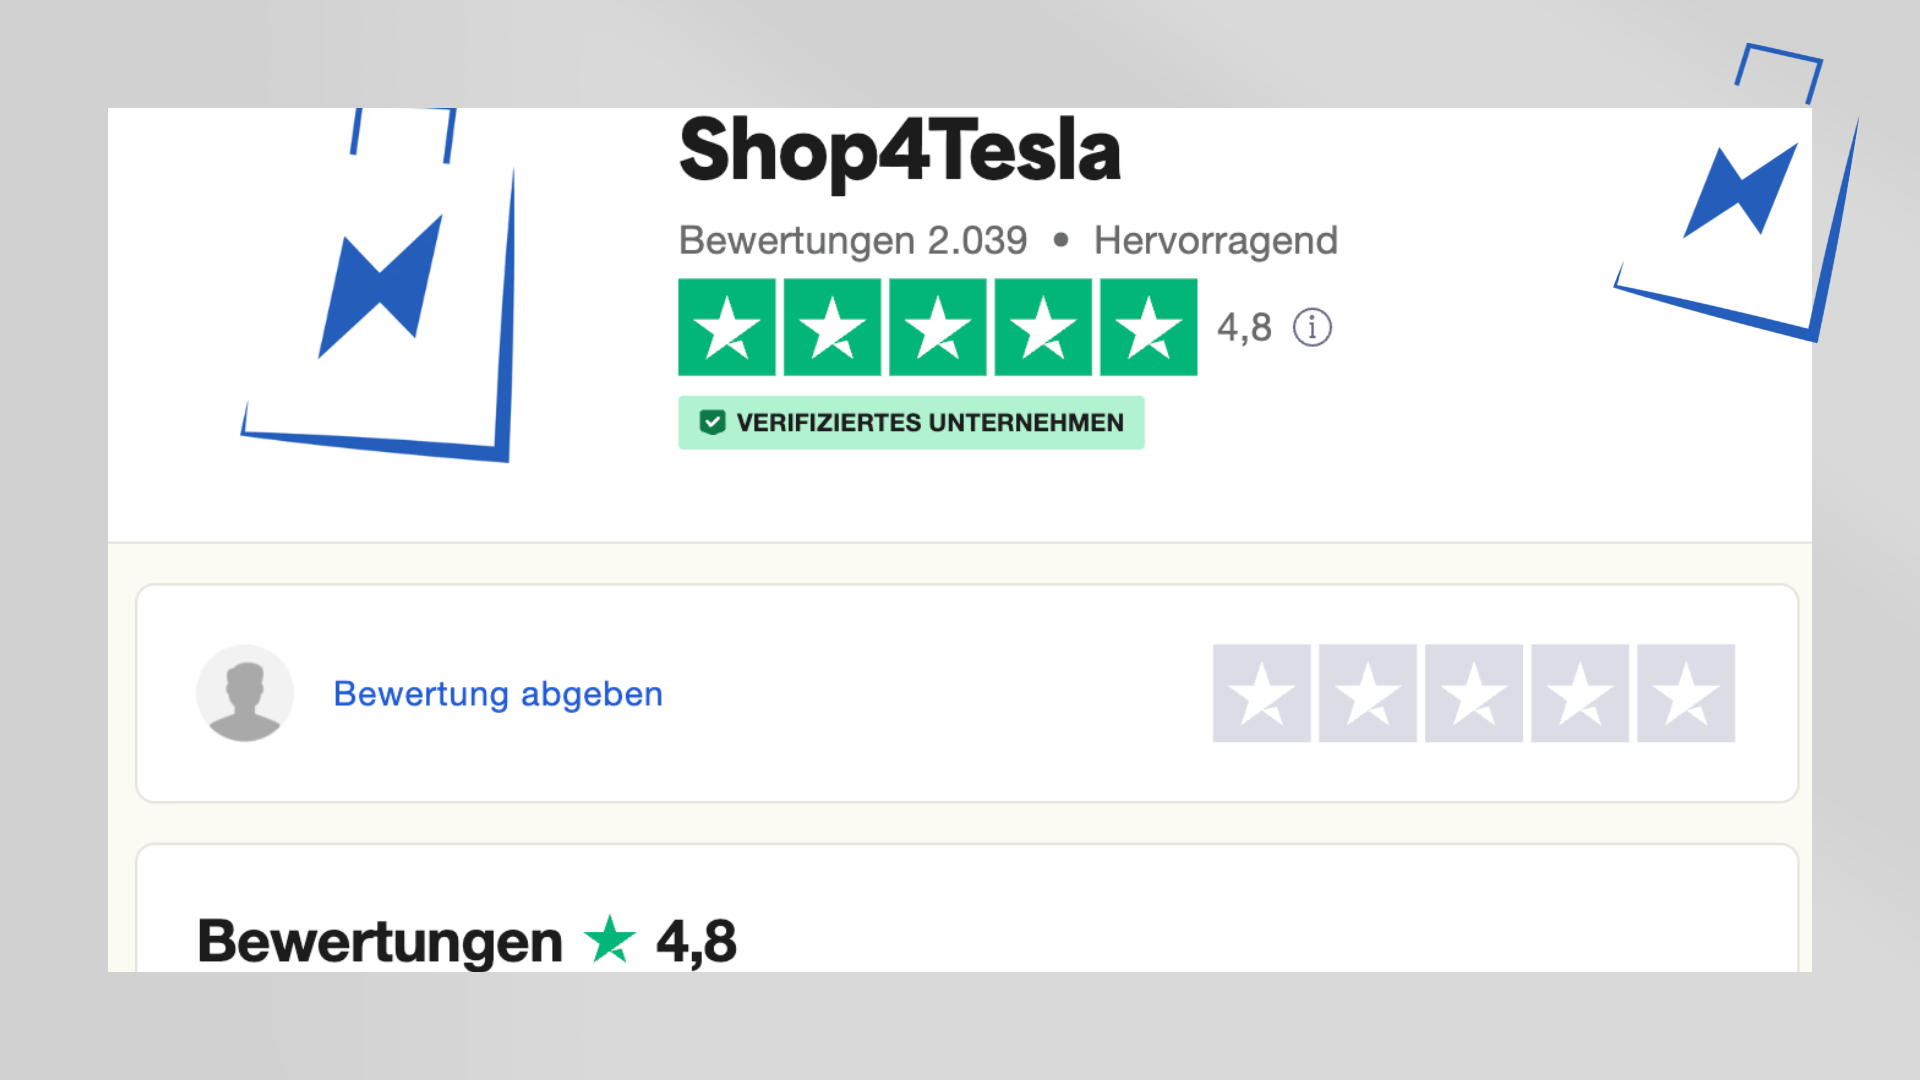 Shop4Tesla says thank you for over 2000 reviews on Trustpilot!